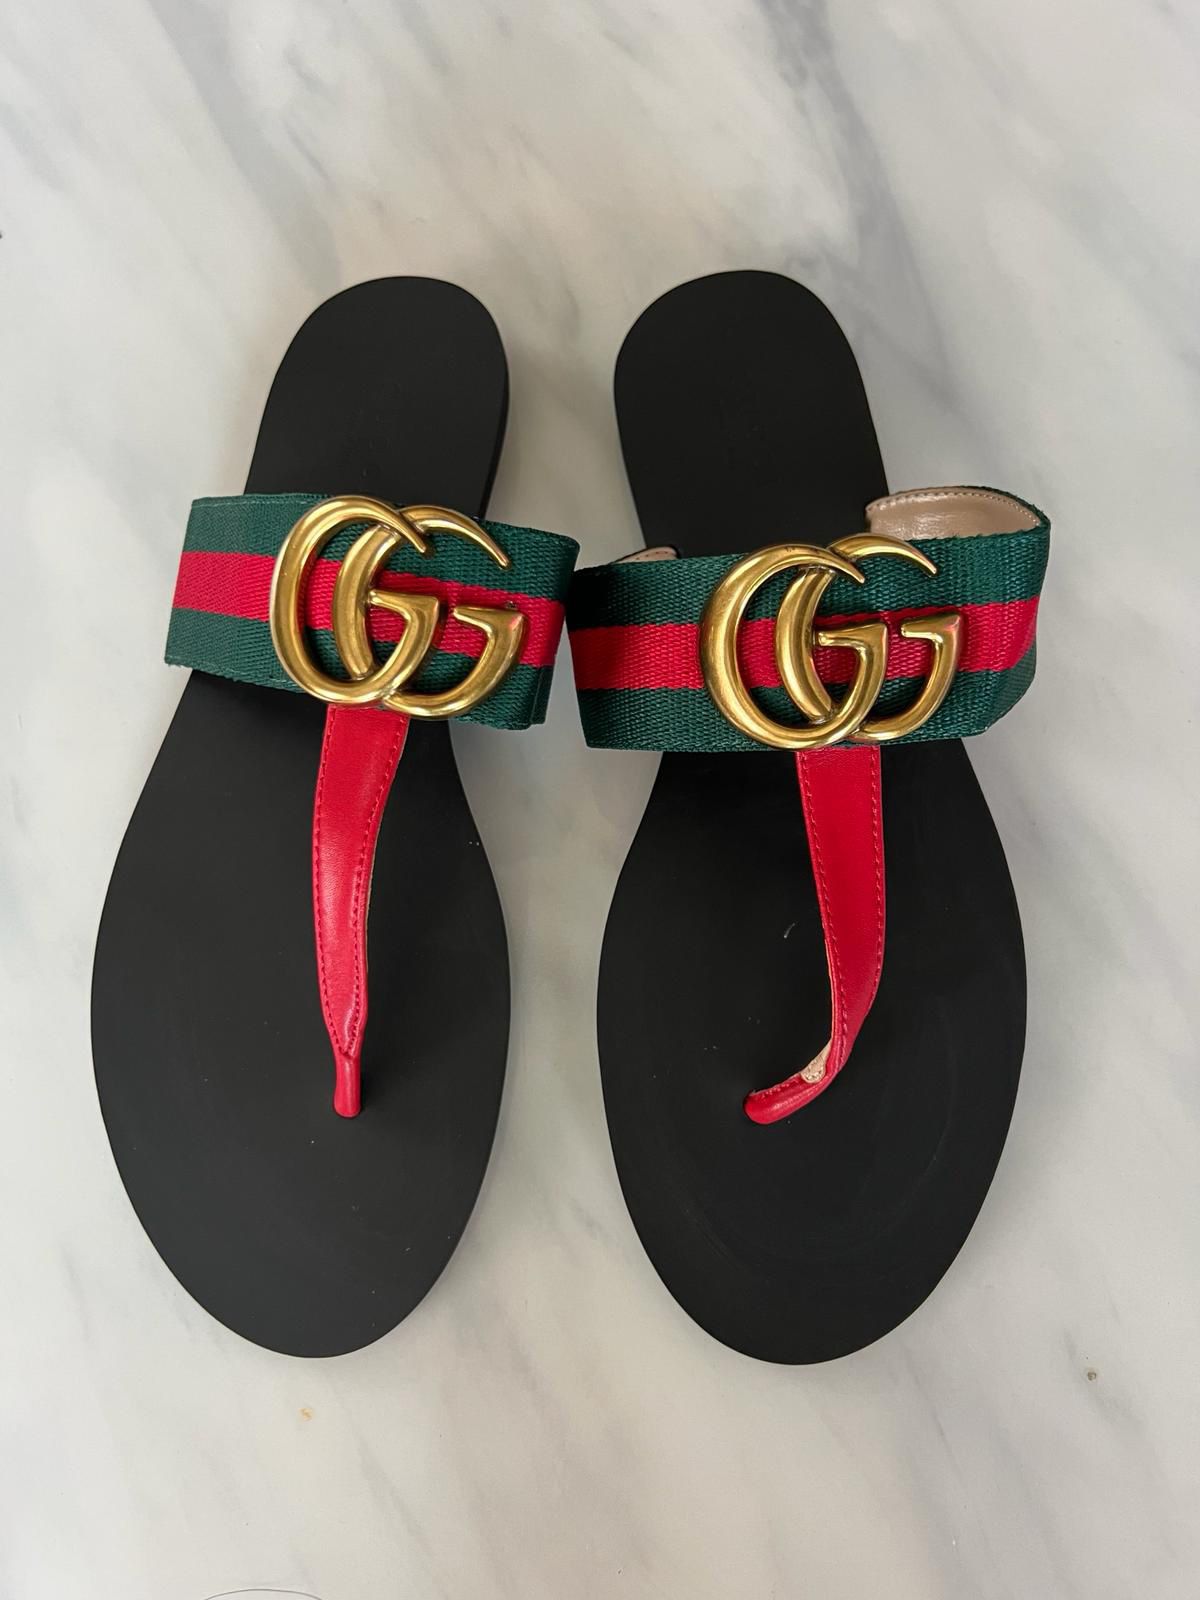 New Women’s Gucci Shoes